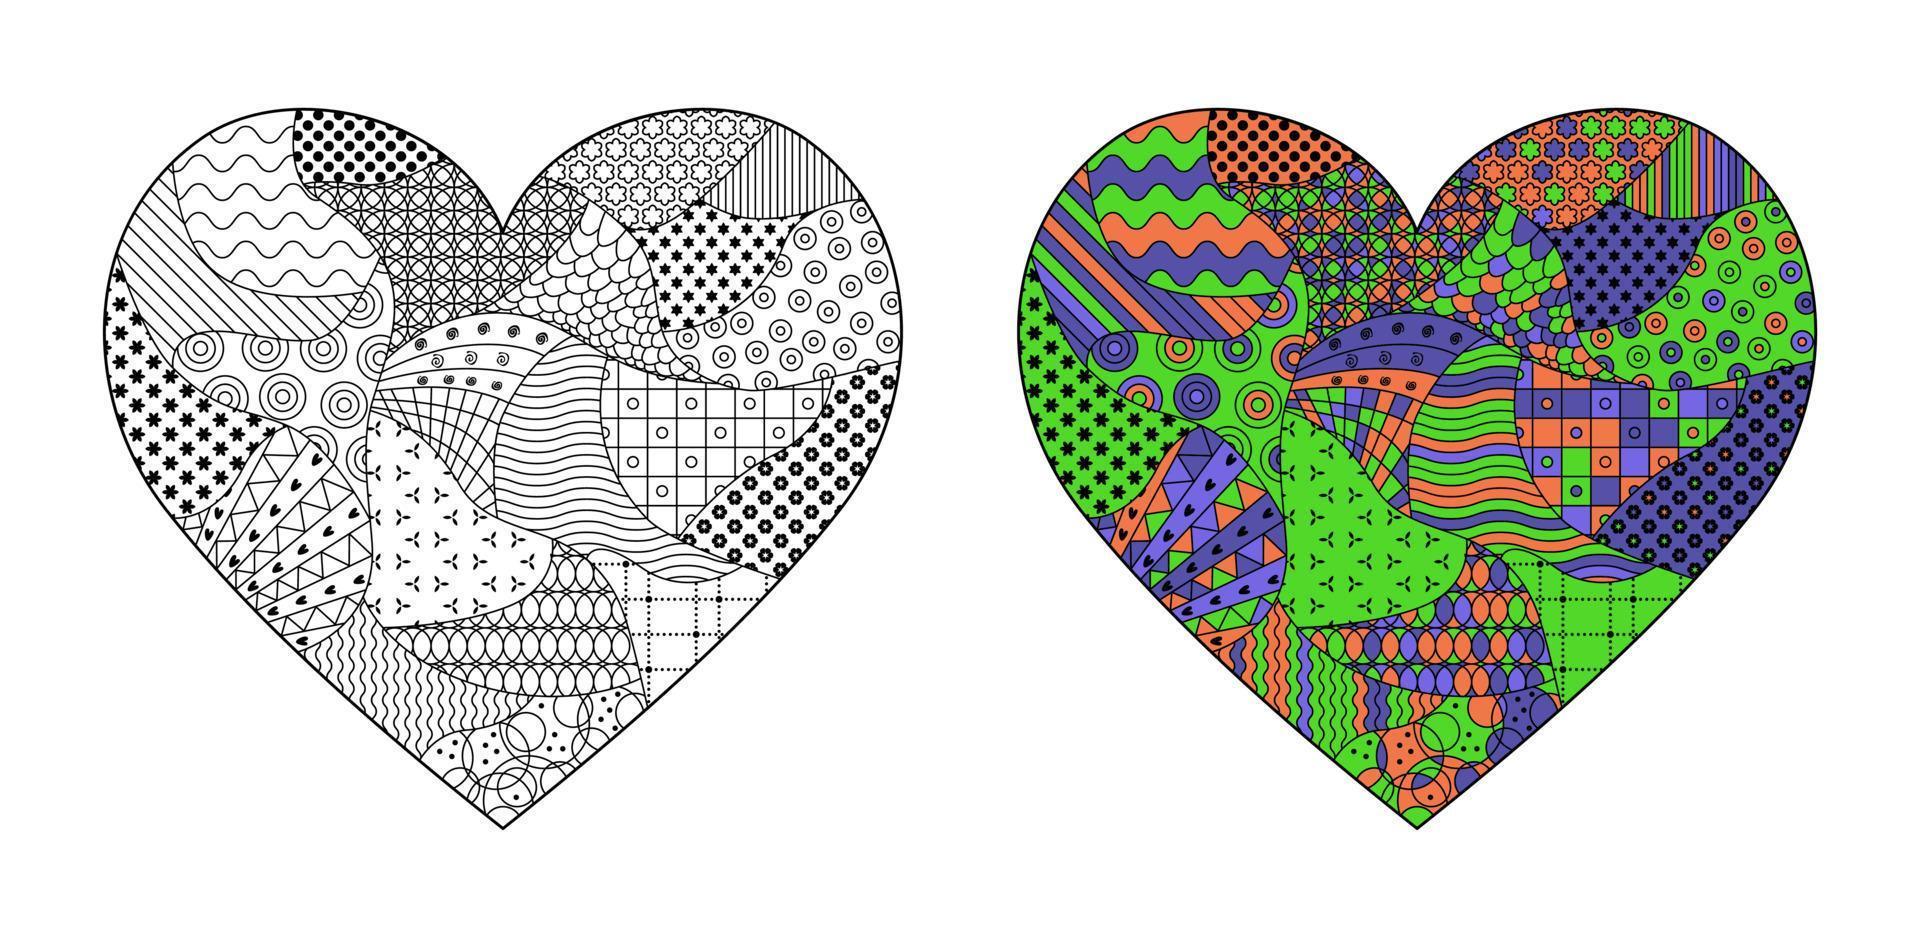 Vector illustration, pattern heart. Coloring book, art design from doodles, patterns and   textures. Abstract line art for background, design element